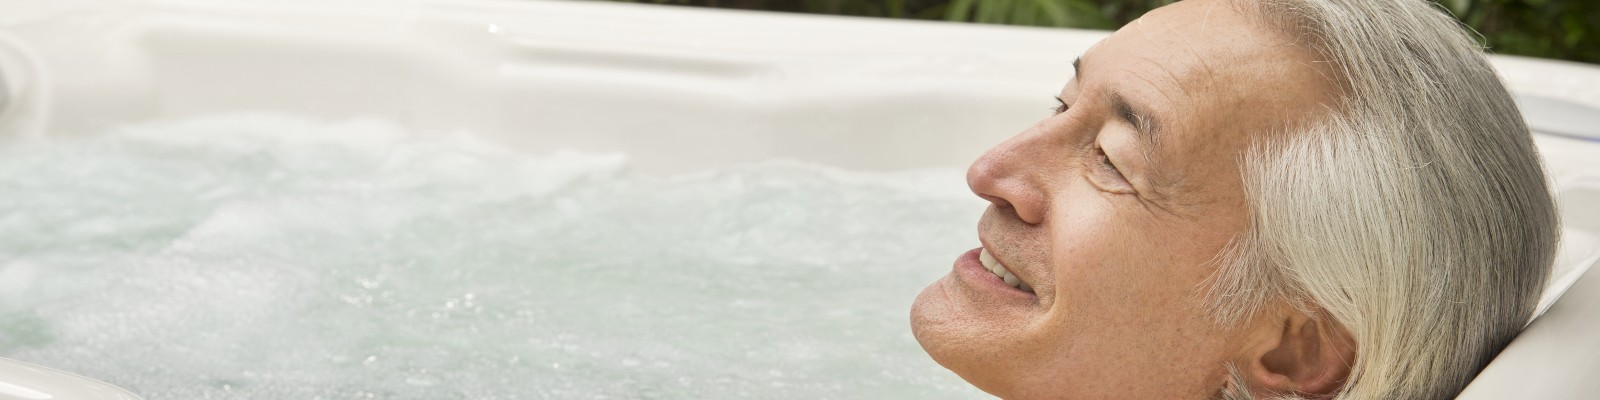 How to get the most out of your hot tub benefits